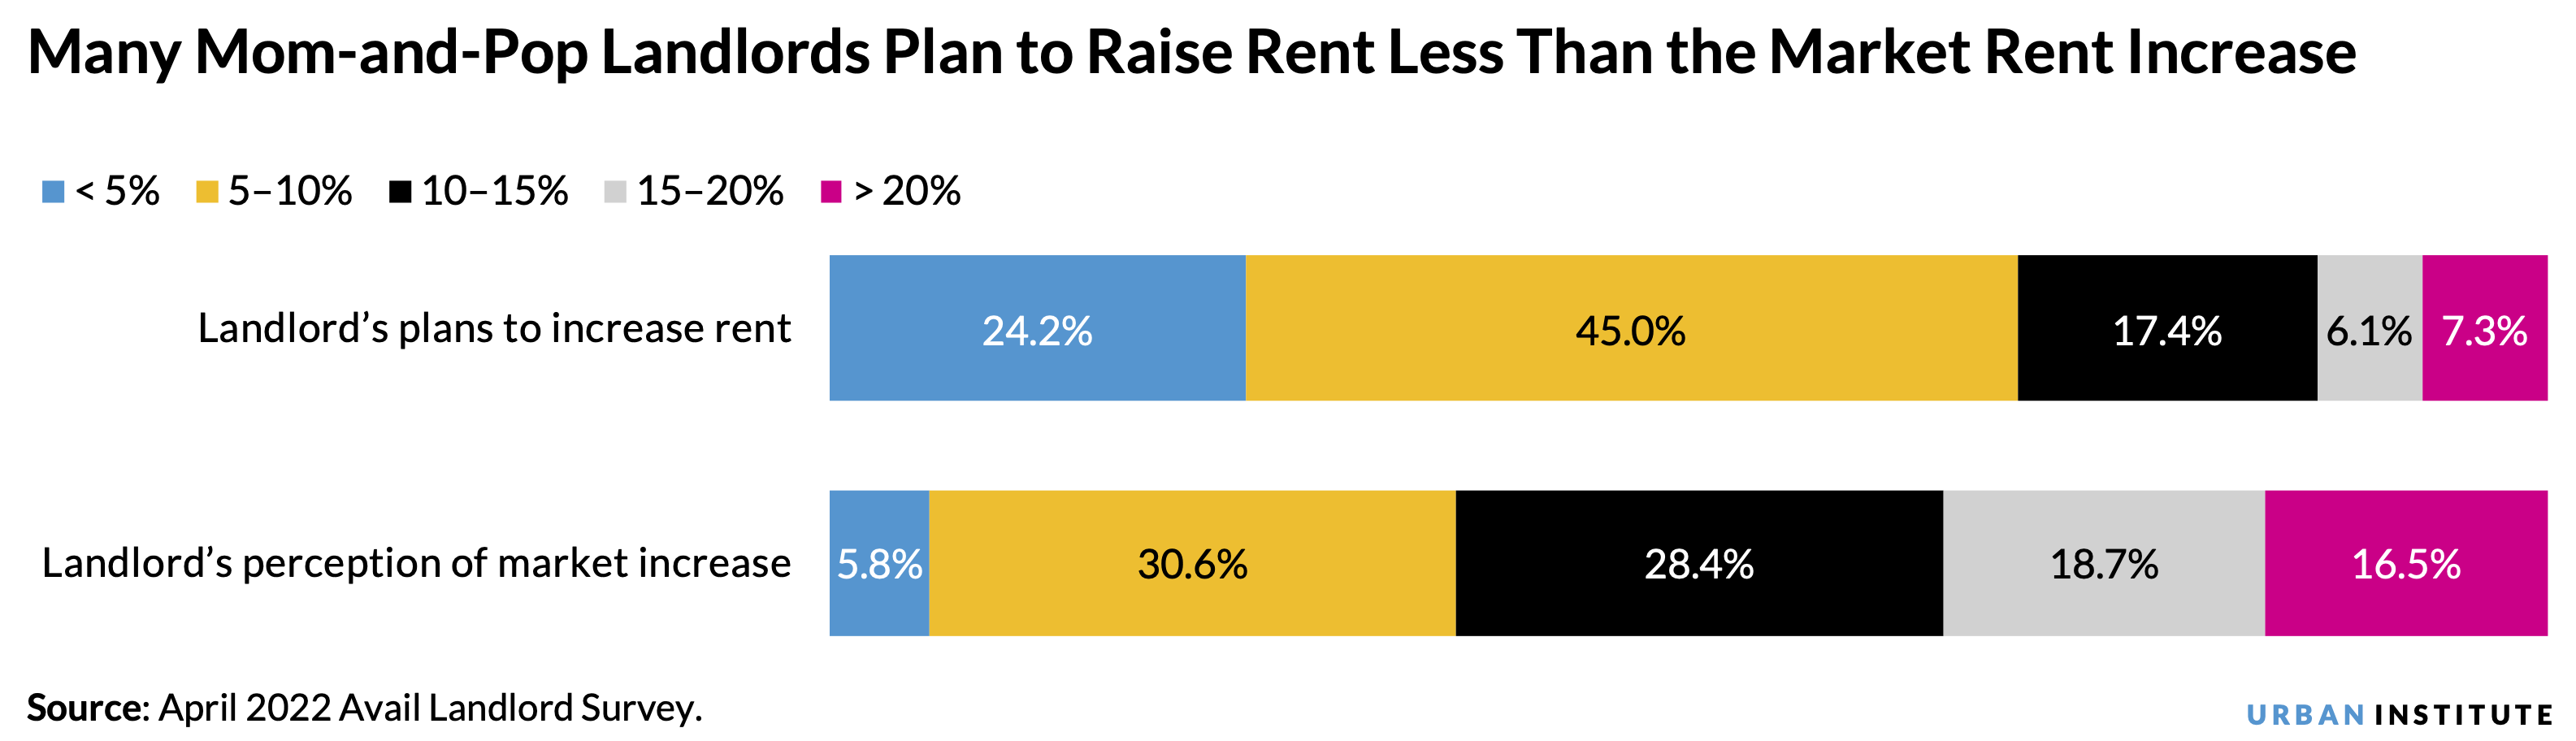 Horizontal bar chart showing that many mom-and-pop landlords plan to raise rent less than the market rent increase